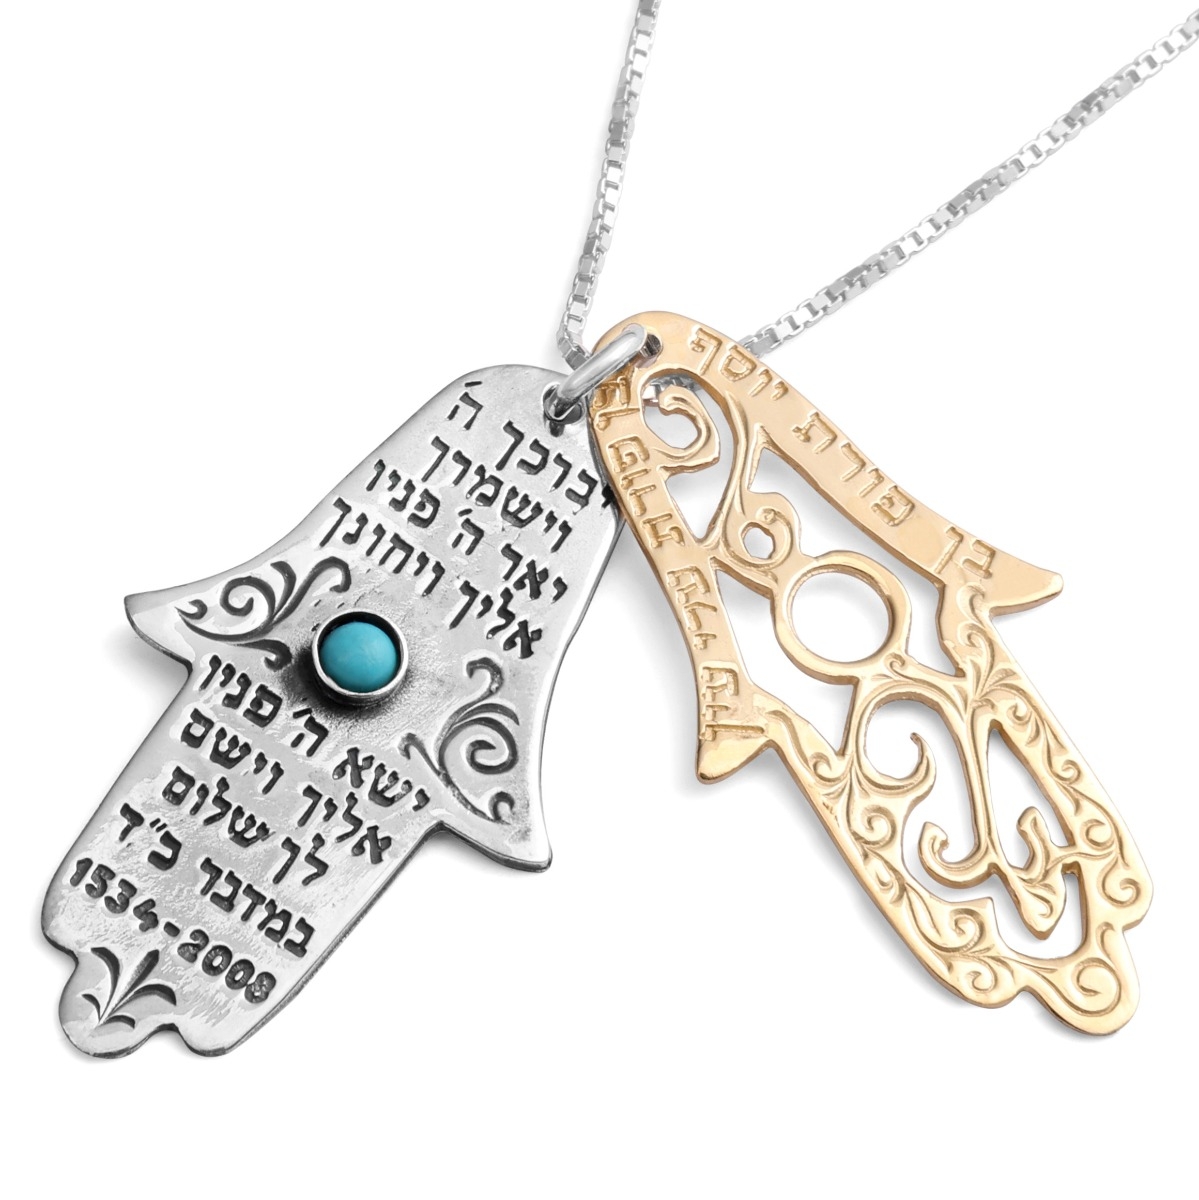 Gold and Silver Hamsa Necklace - Priestly Blessing - Book of Numbers 6:24-26 - 1